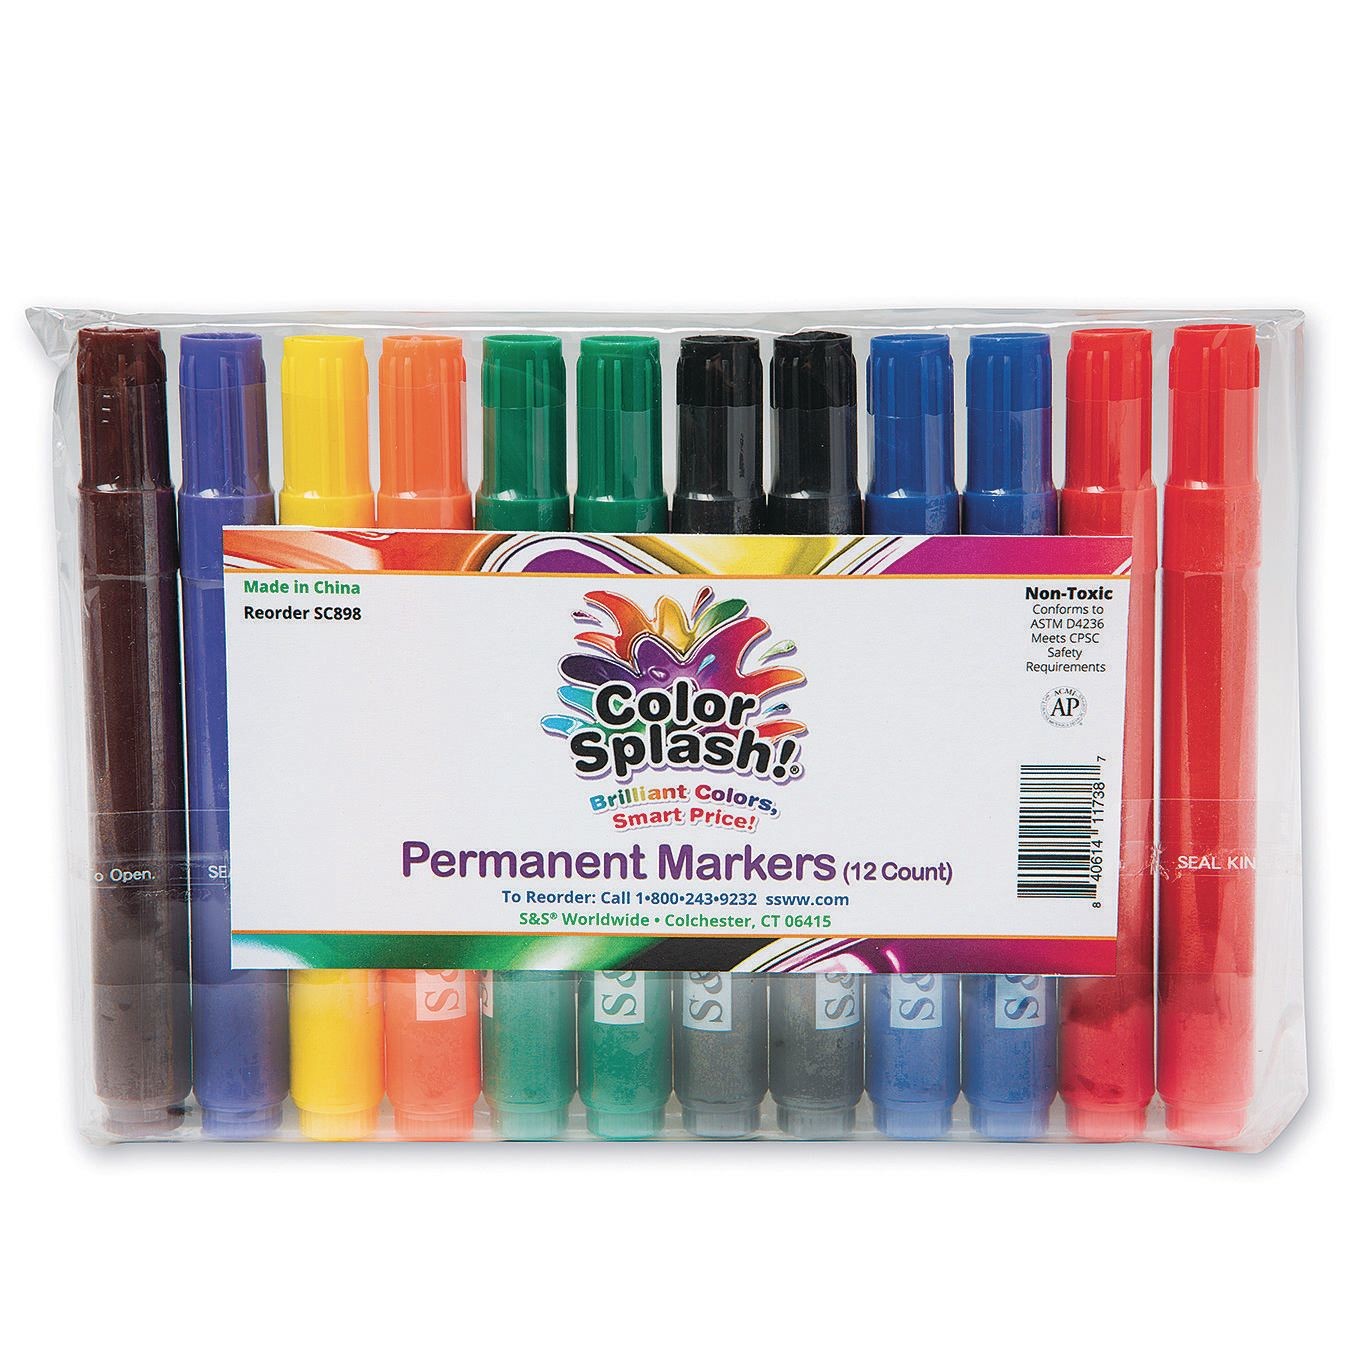 Sharpie Coloring Kit With 12 Art Pens 13 Markers 1 Connect The